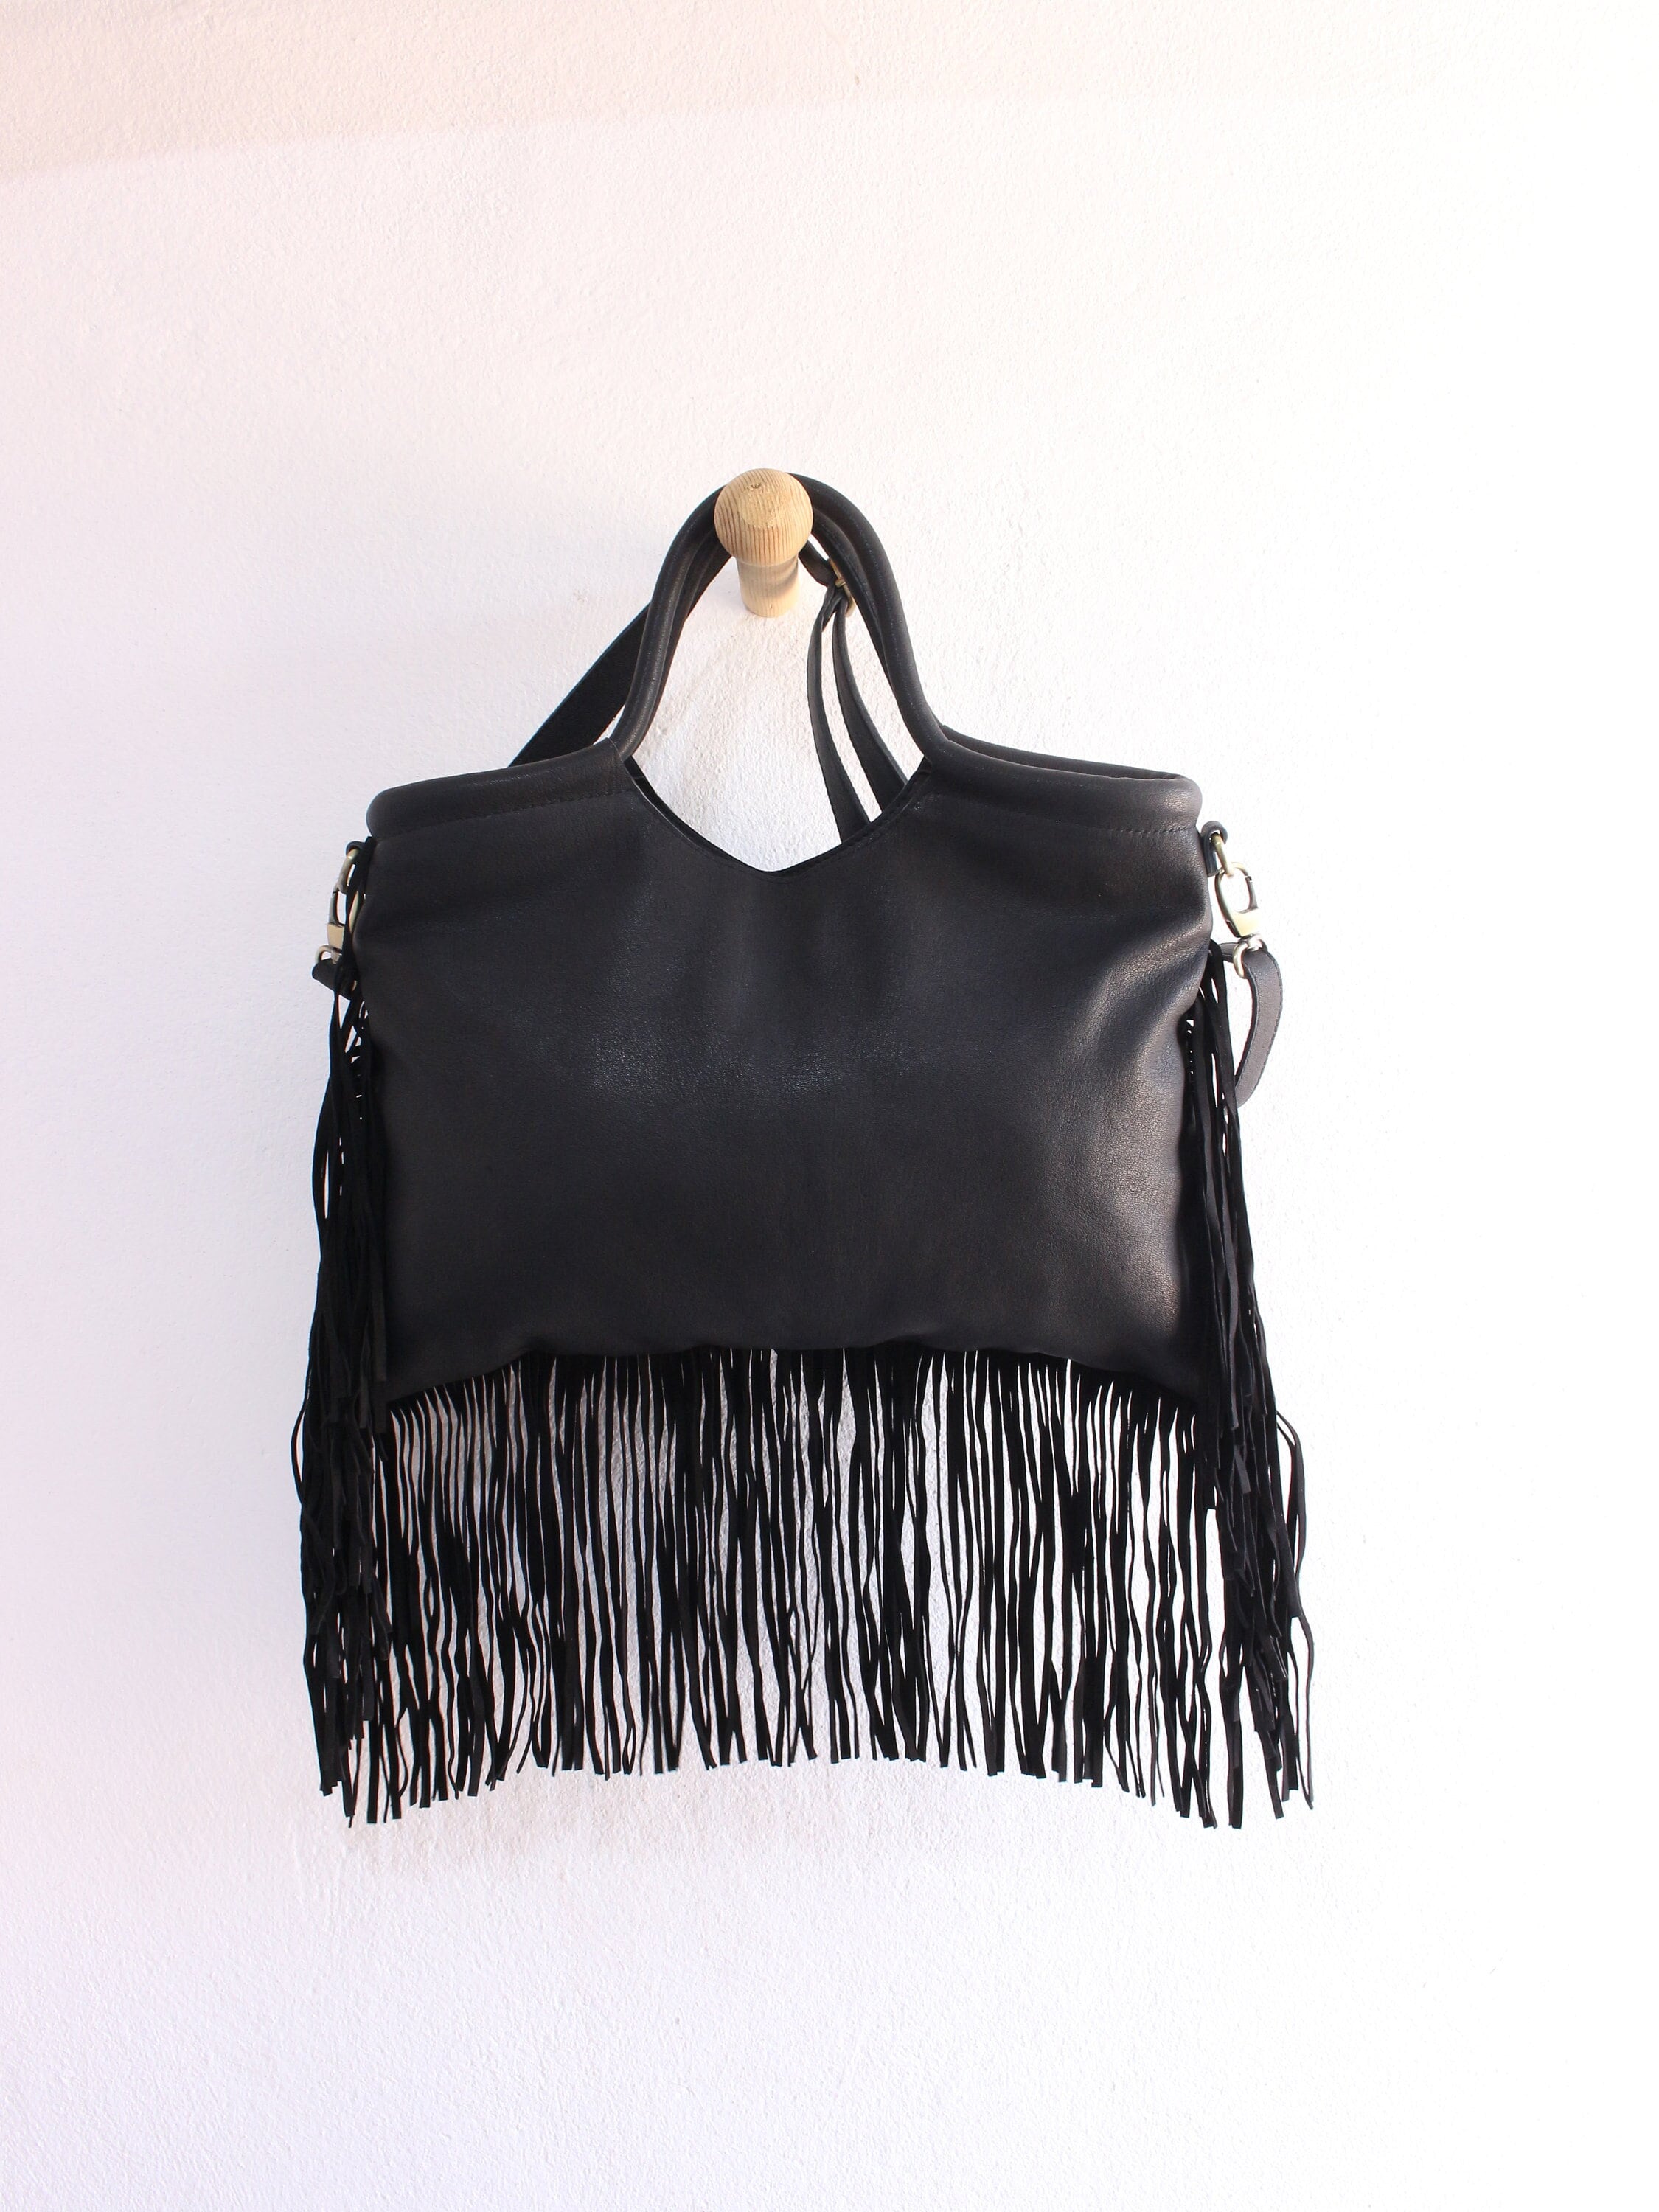 BLACK FRINGE LEATHER PURSE - White Rock Country Rags & Doodads LLC